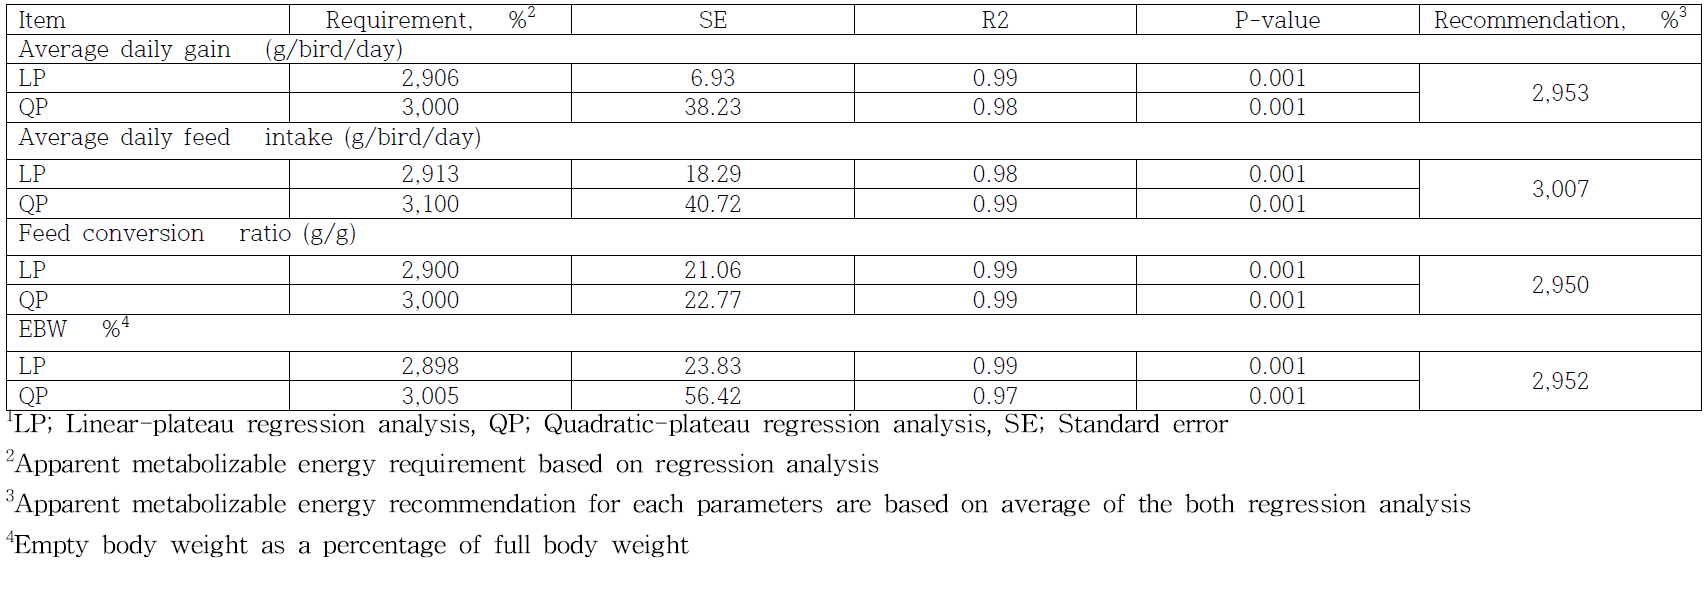 Estimated apparent metabolizable energy (AME, kcal/kg) requirements and recommendations for KND for hatch to 21 days of age based on linear-plateau and quadratic-plateau regression analyszs1